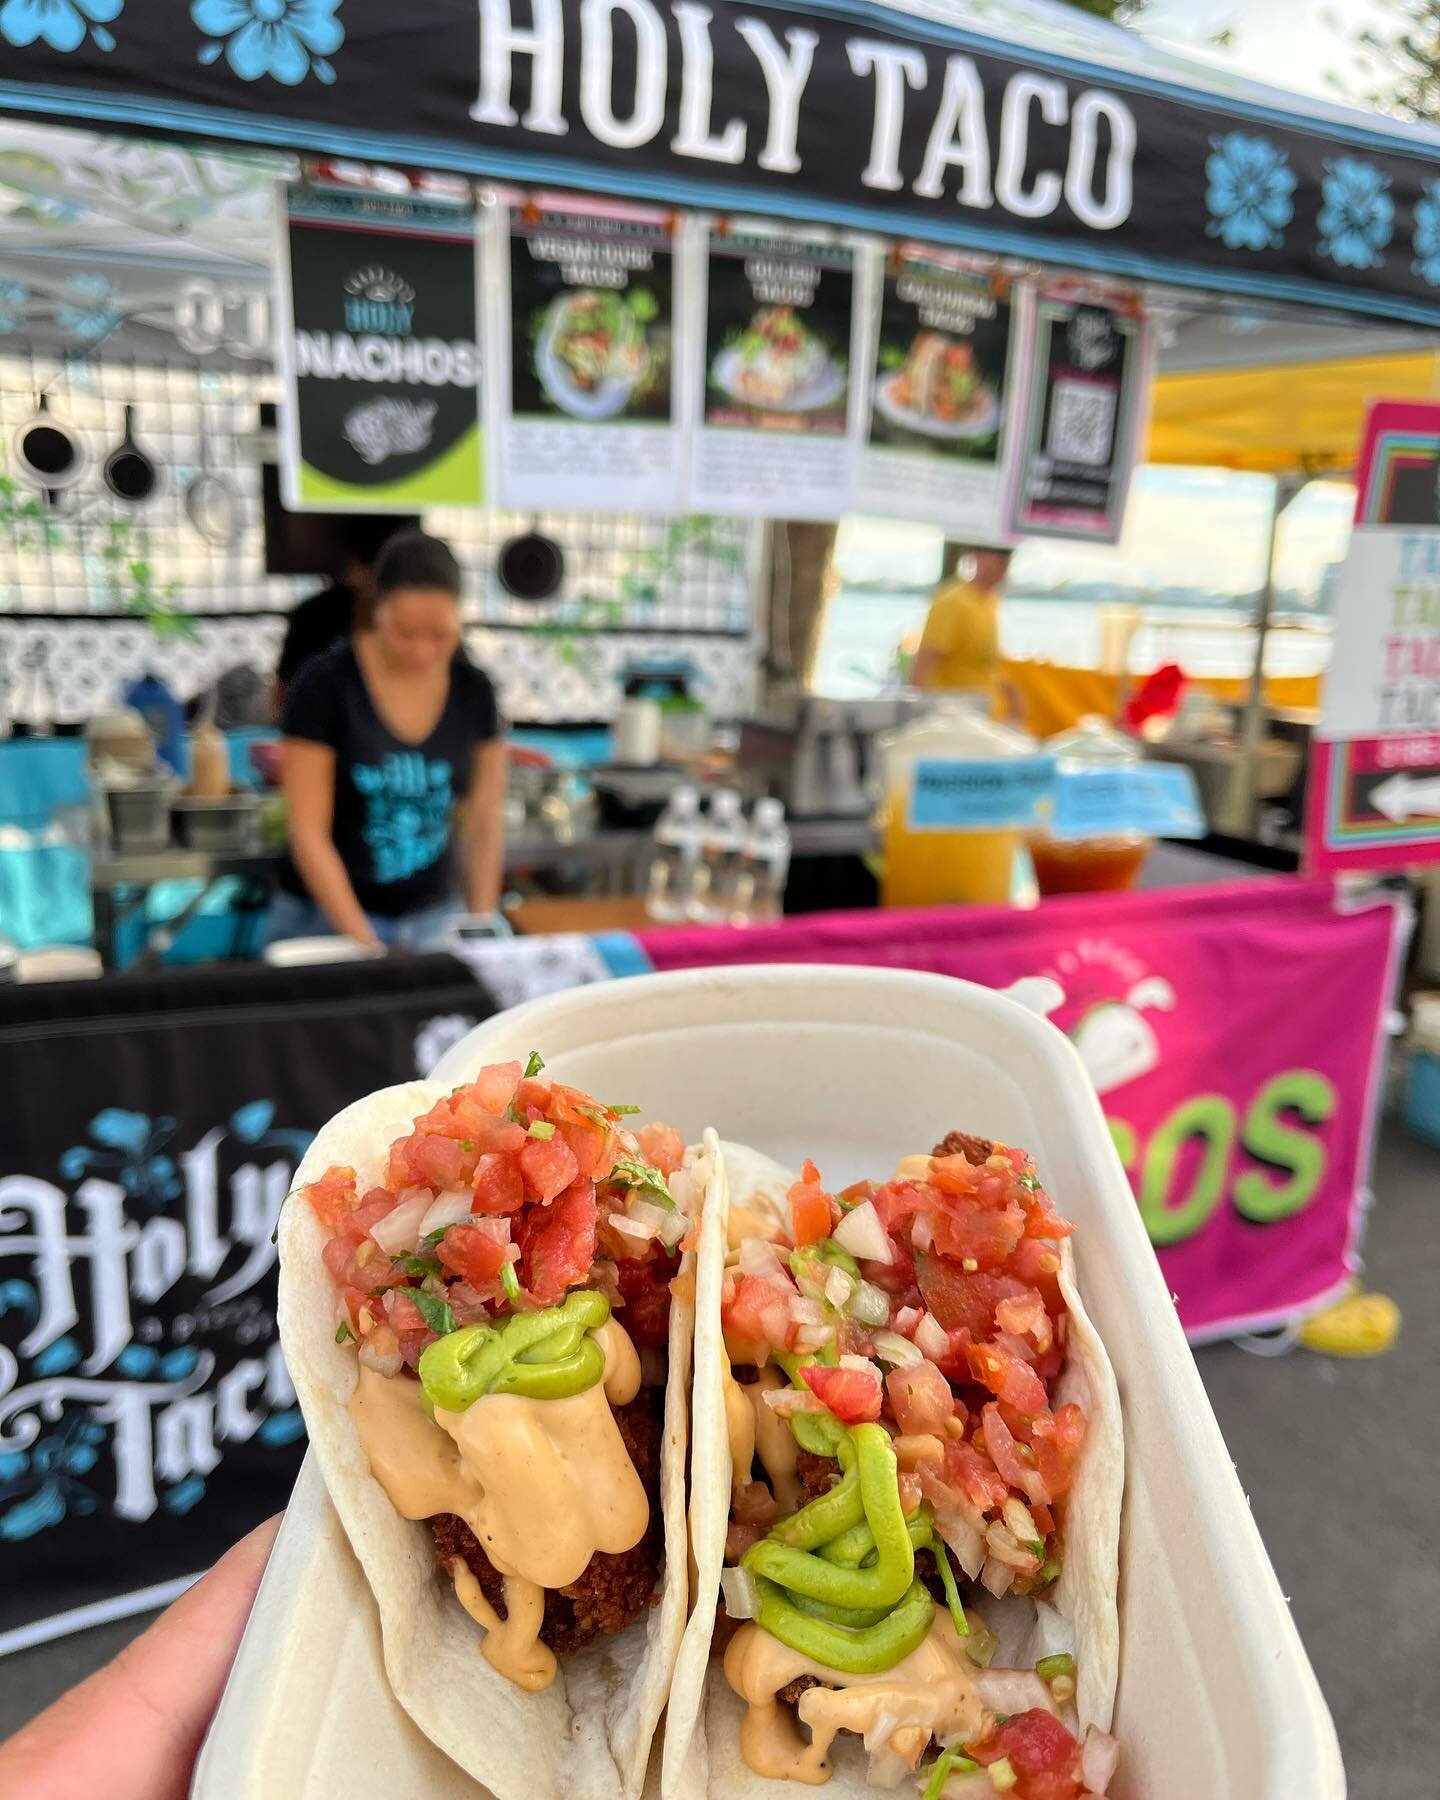 🌮 Join us today at the Caloundra Street Fair and embark on a mouthwatering plant-based culinary adventure with Holy Taco! 🌱✨

📍 Location: Caloundra Street Fair
⏰ Time: Until 1:00pm

Indulge in a delightful feast that celebrates the vibrant flavors